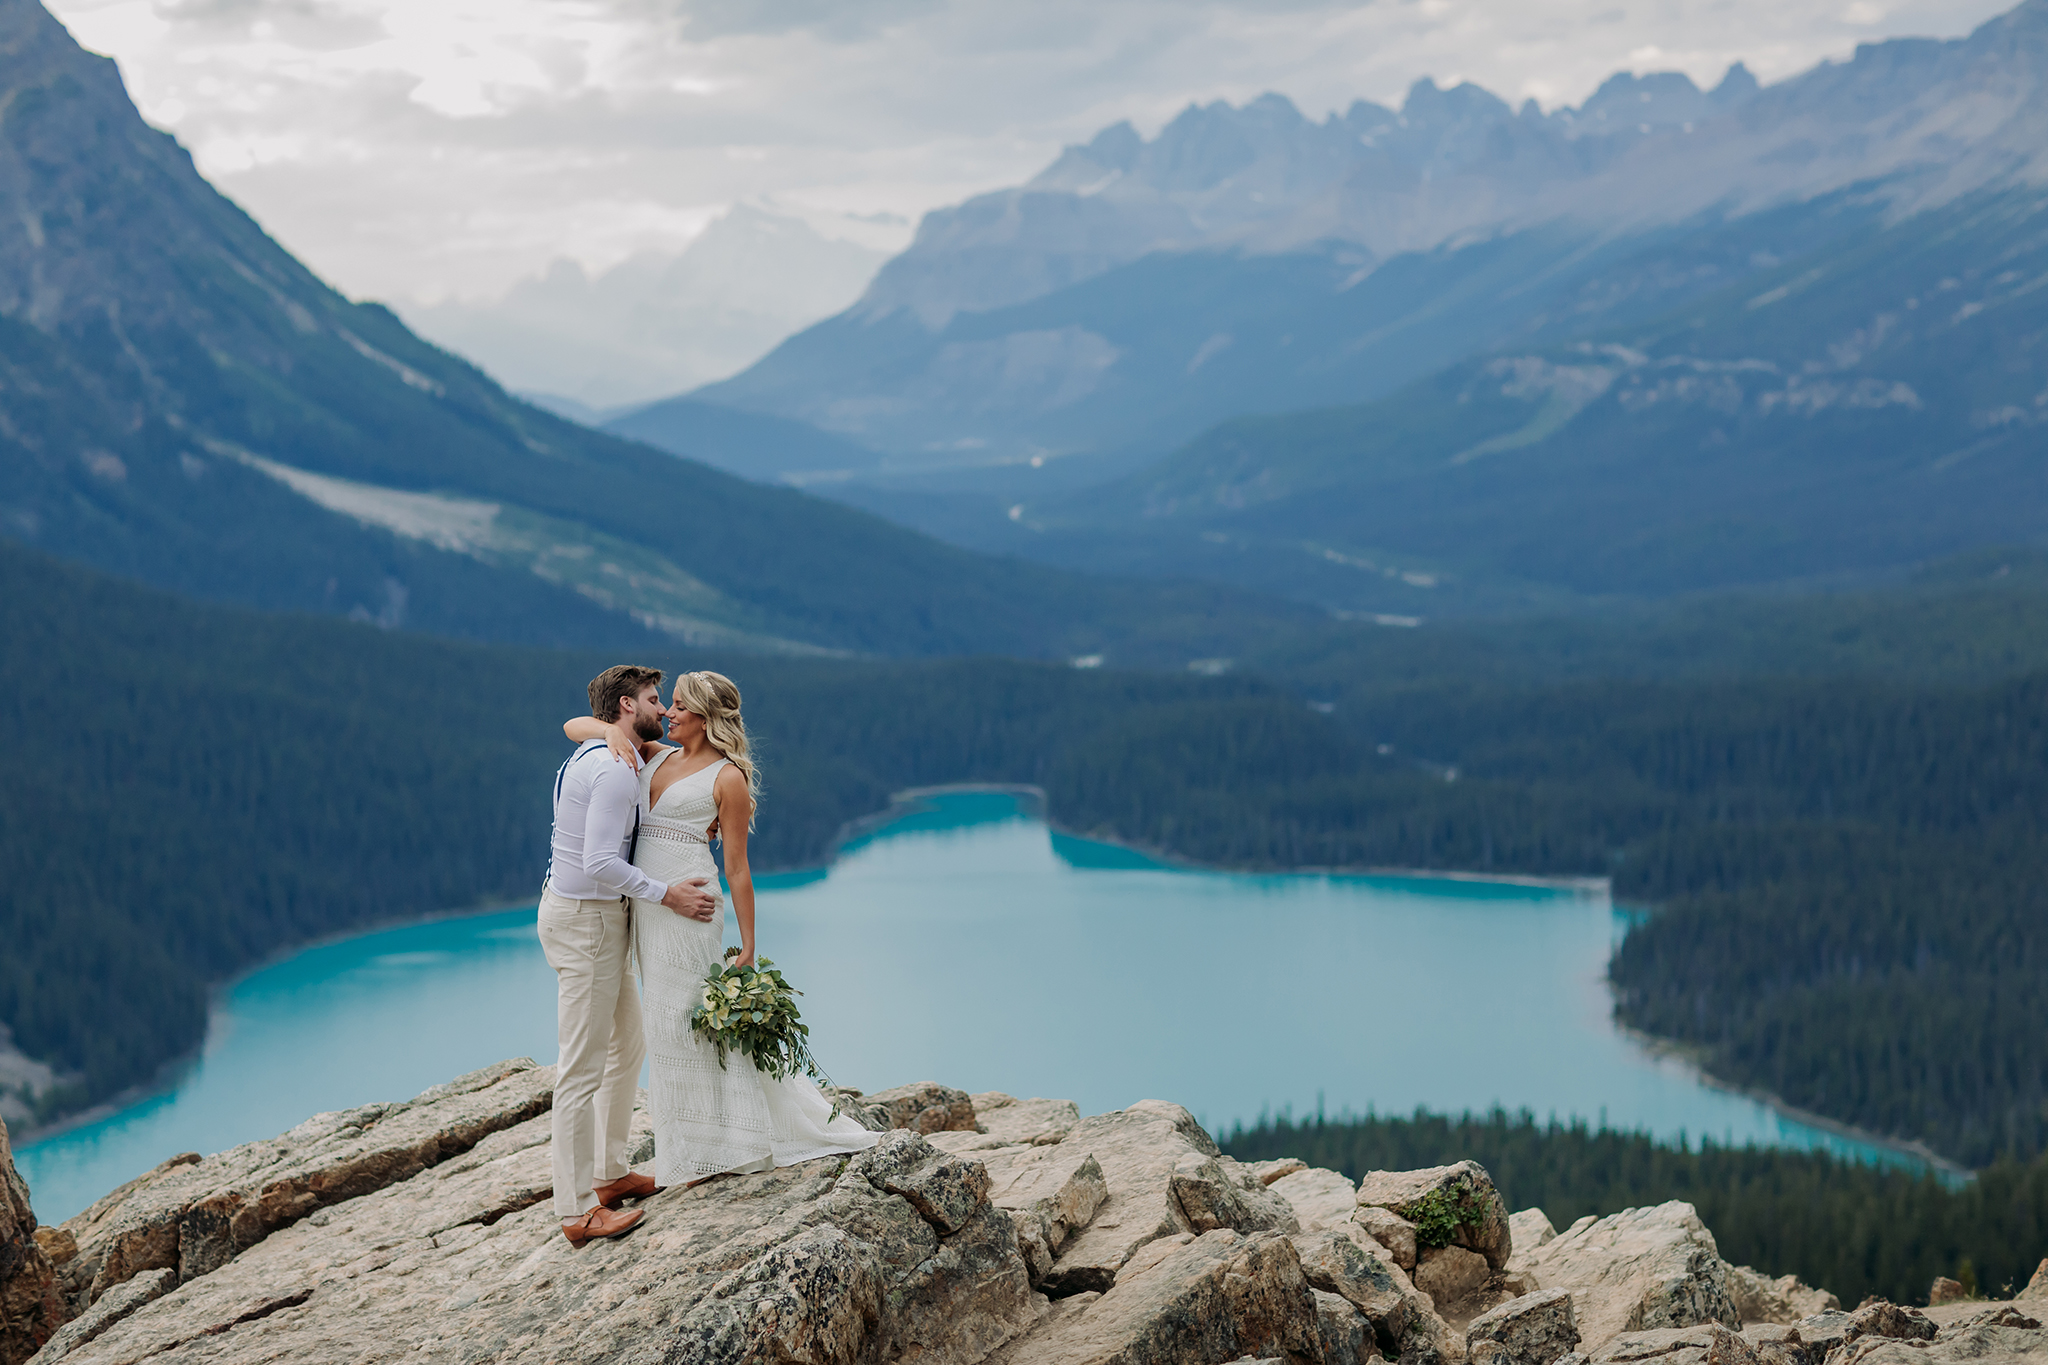 A Guide to Eloping in the Canadian Rockies | Mountain Wedding photographed by ENV Photography | boho mountain wedding at Peyto Lake high on the rocks overlooking incredible mountain views & blue glacial lake